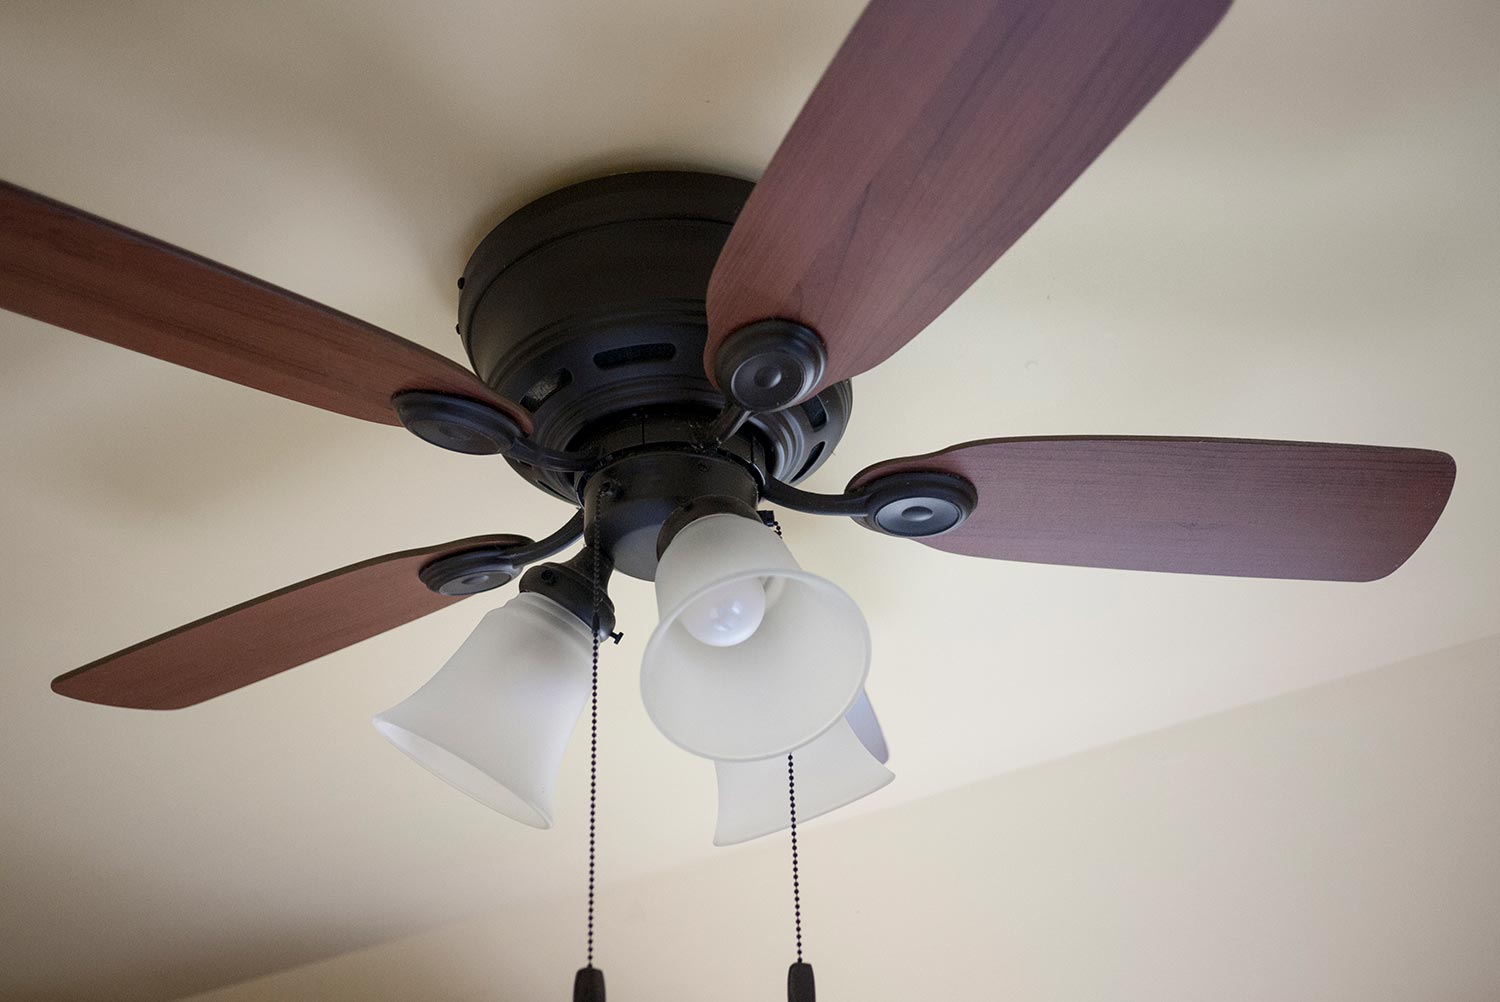 Wooden fan blades with a black metal body and chain switches